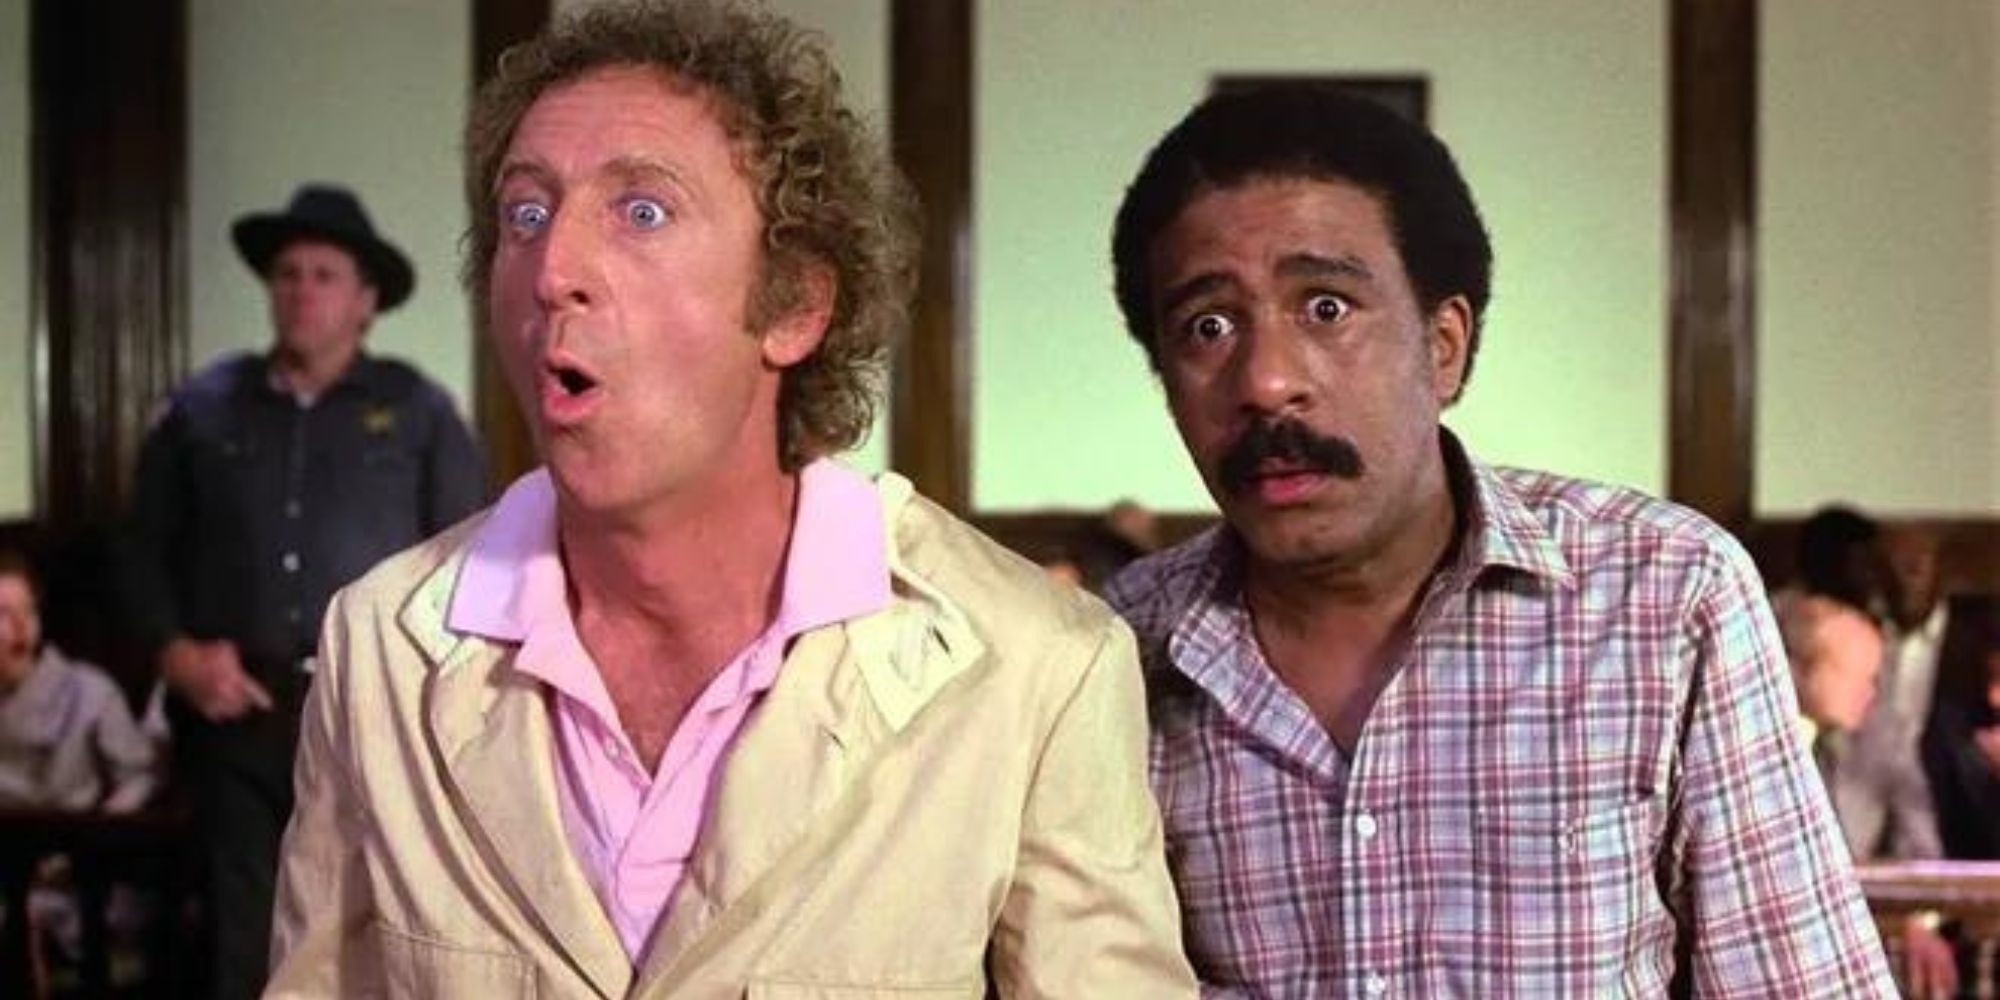 Skip and Harry looking surprised in Stir Crazy